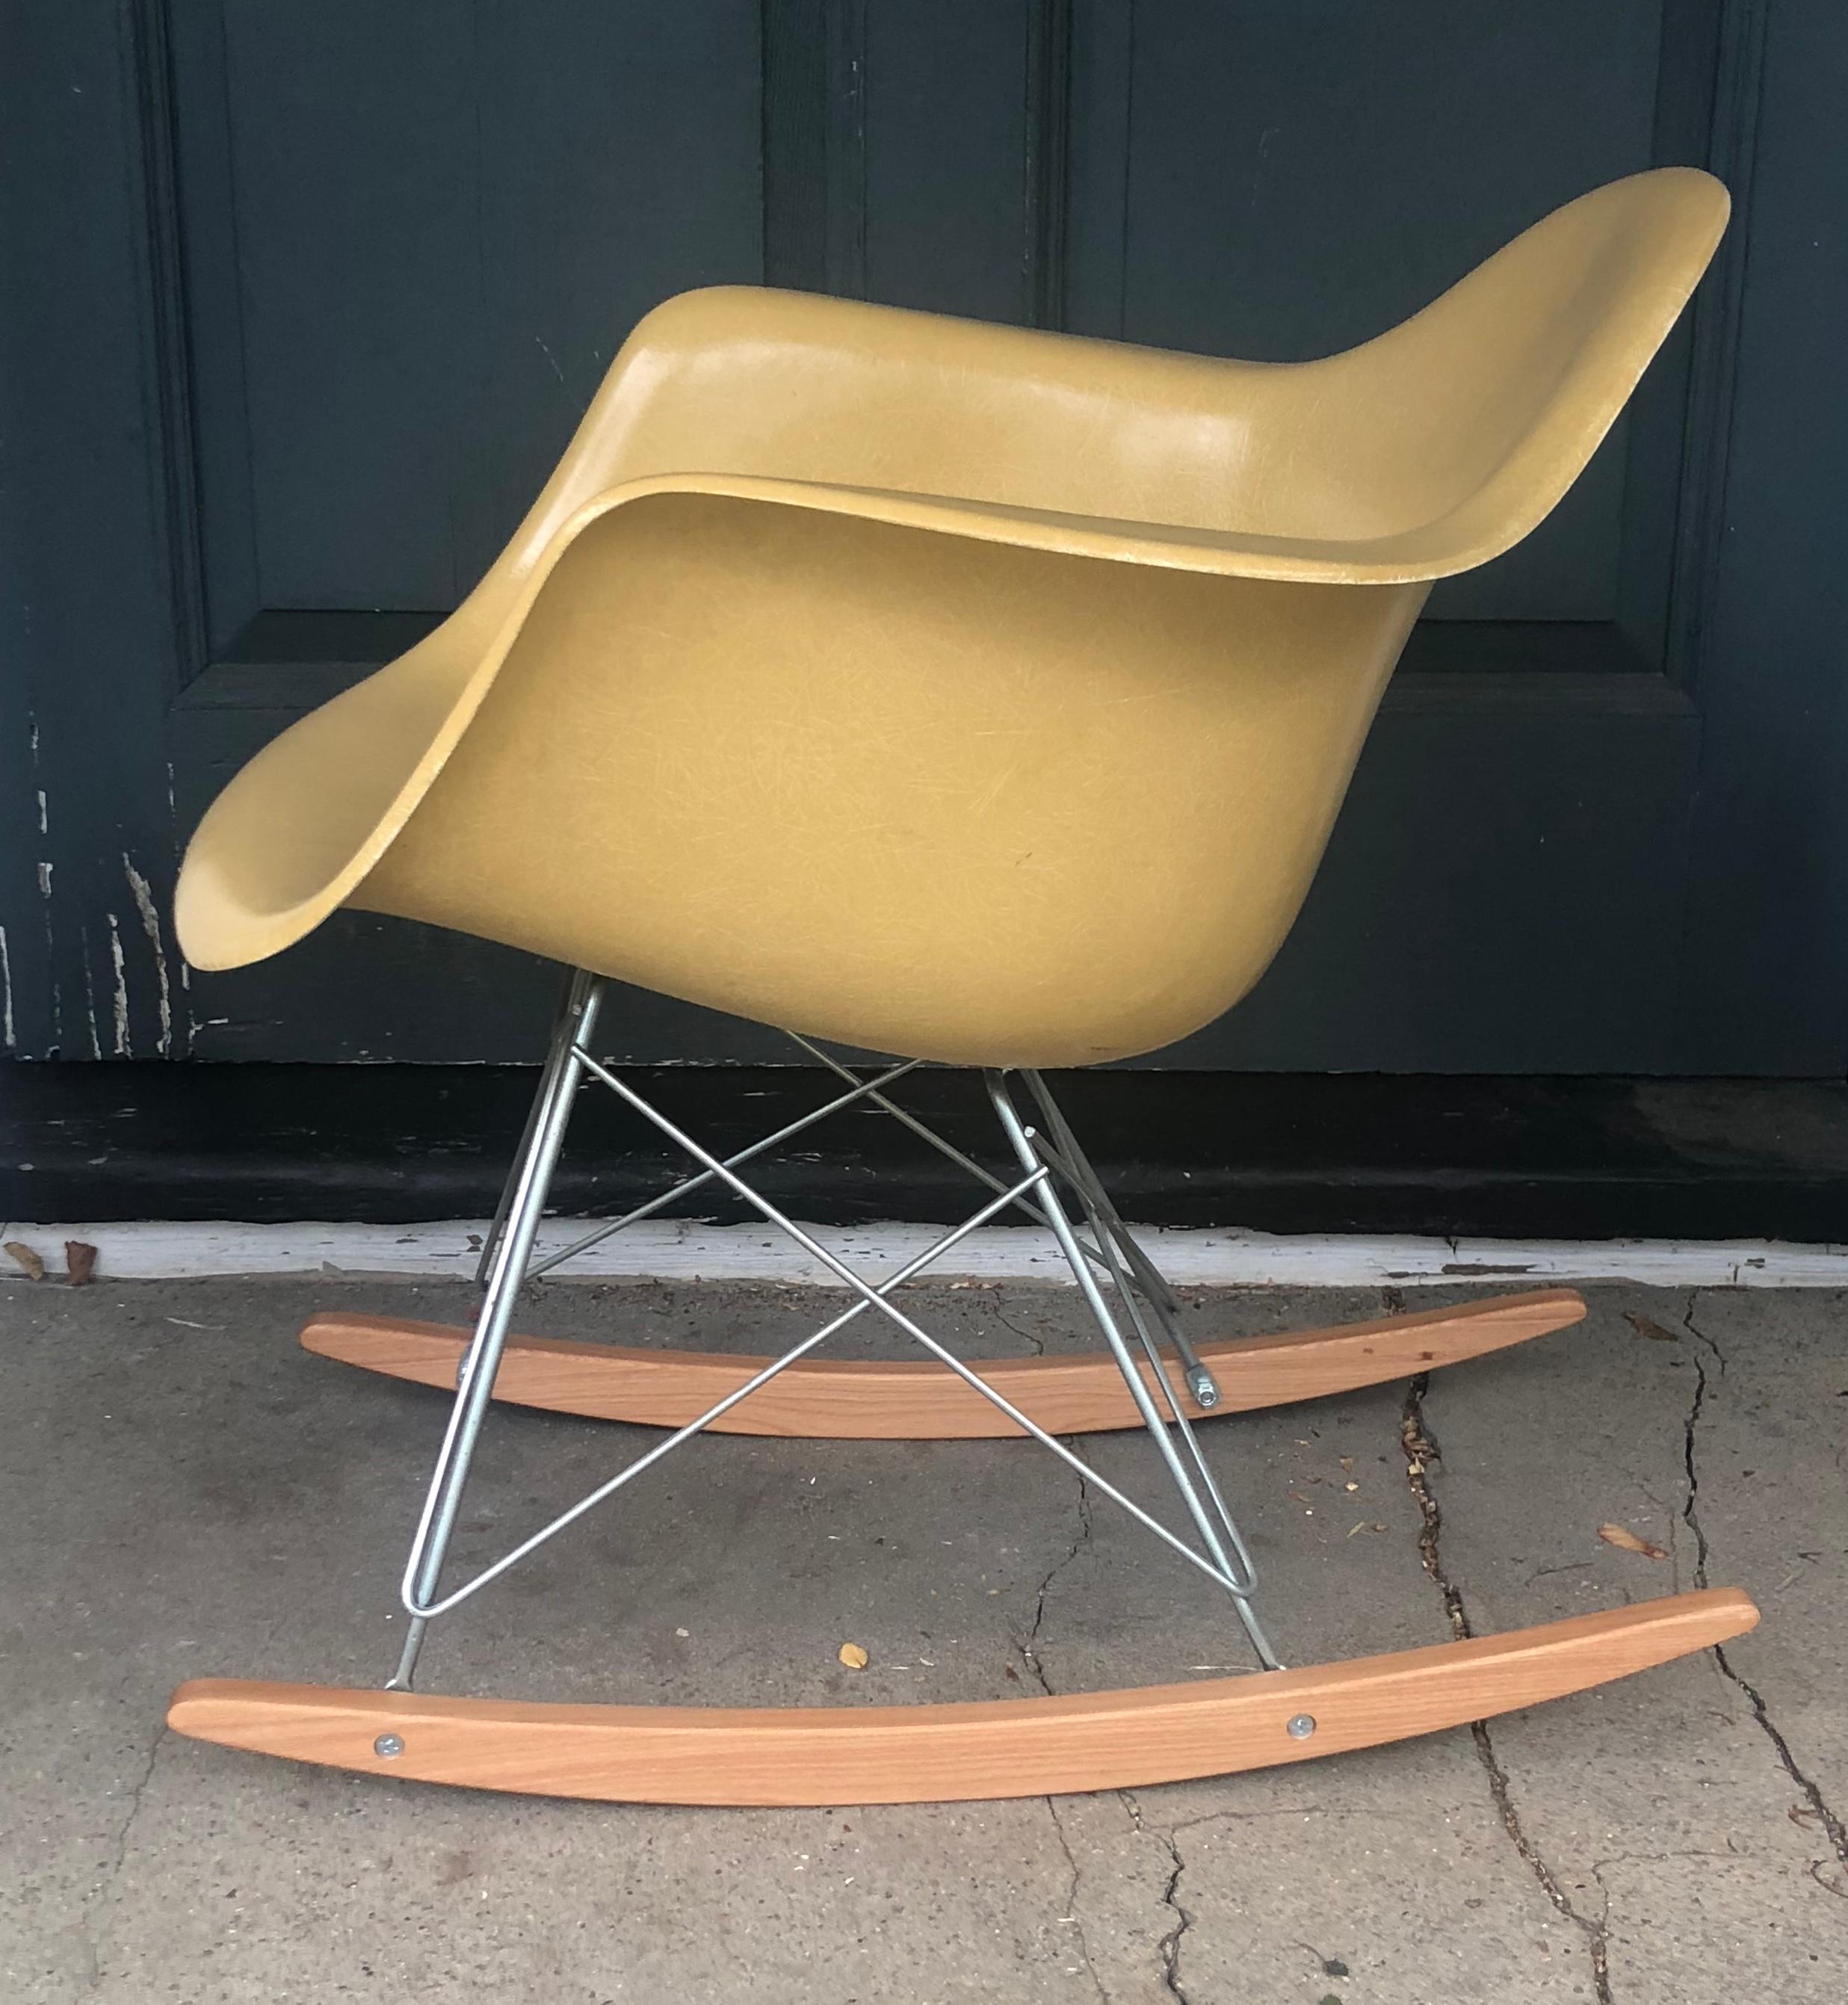 Herman Miller Eames rocking chair, RAR model. In perfect condition. Shell is ochre color and embossed with Herman Miller logo. Dates to late 1950s. Base is new from Modern Conscience.